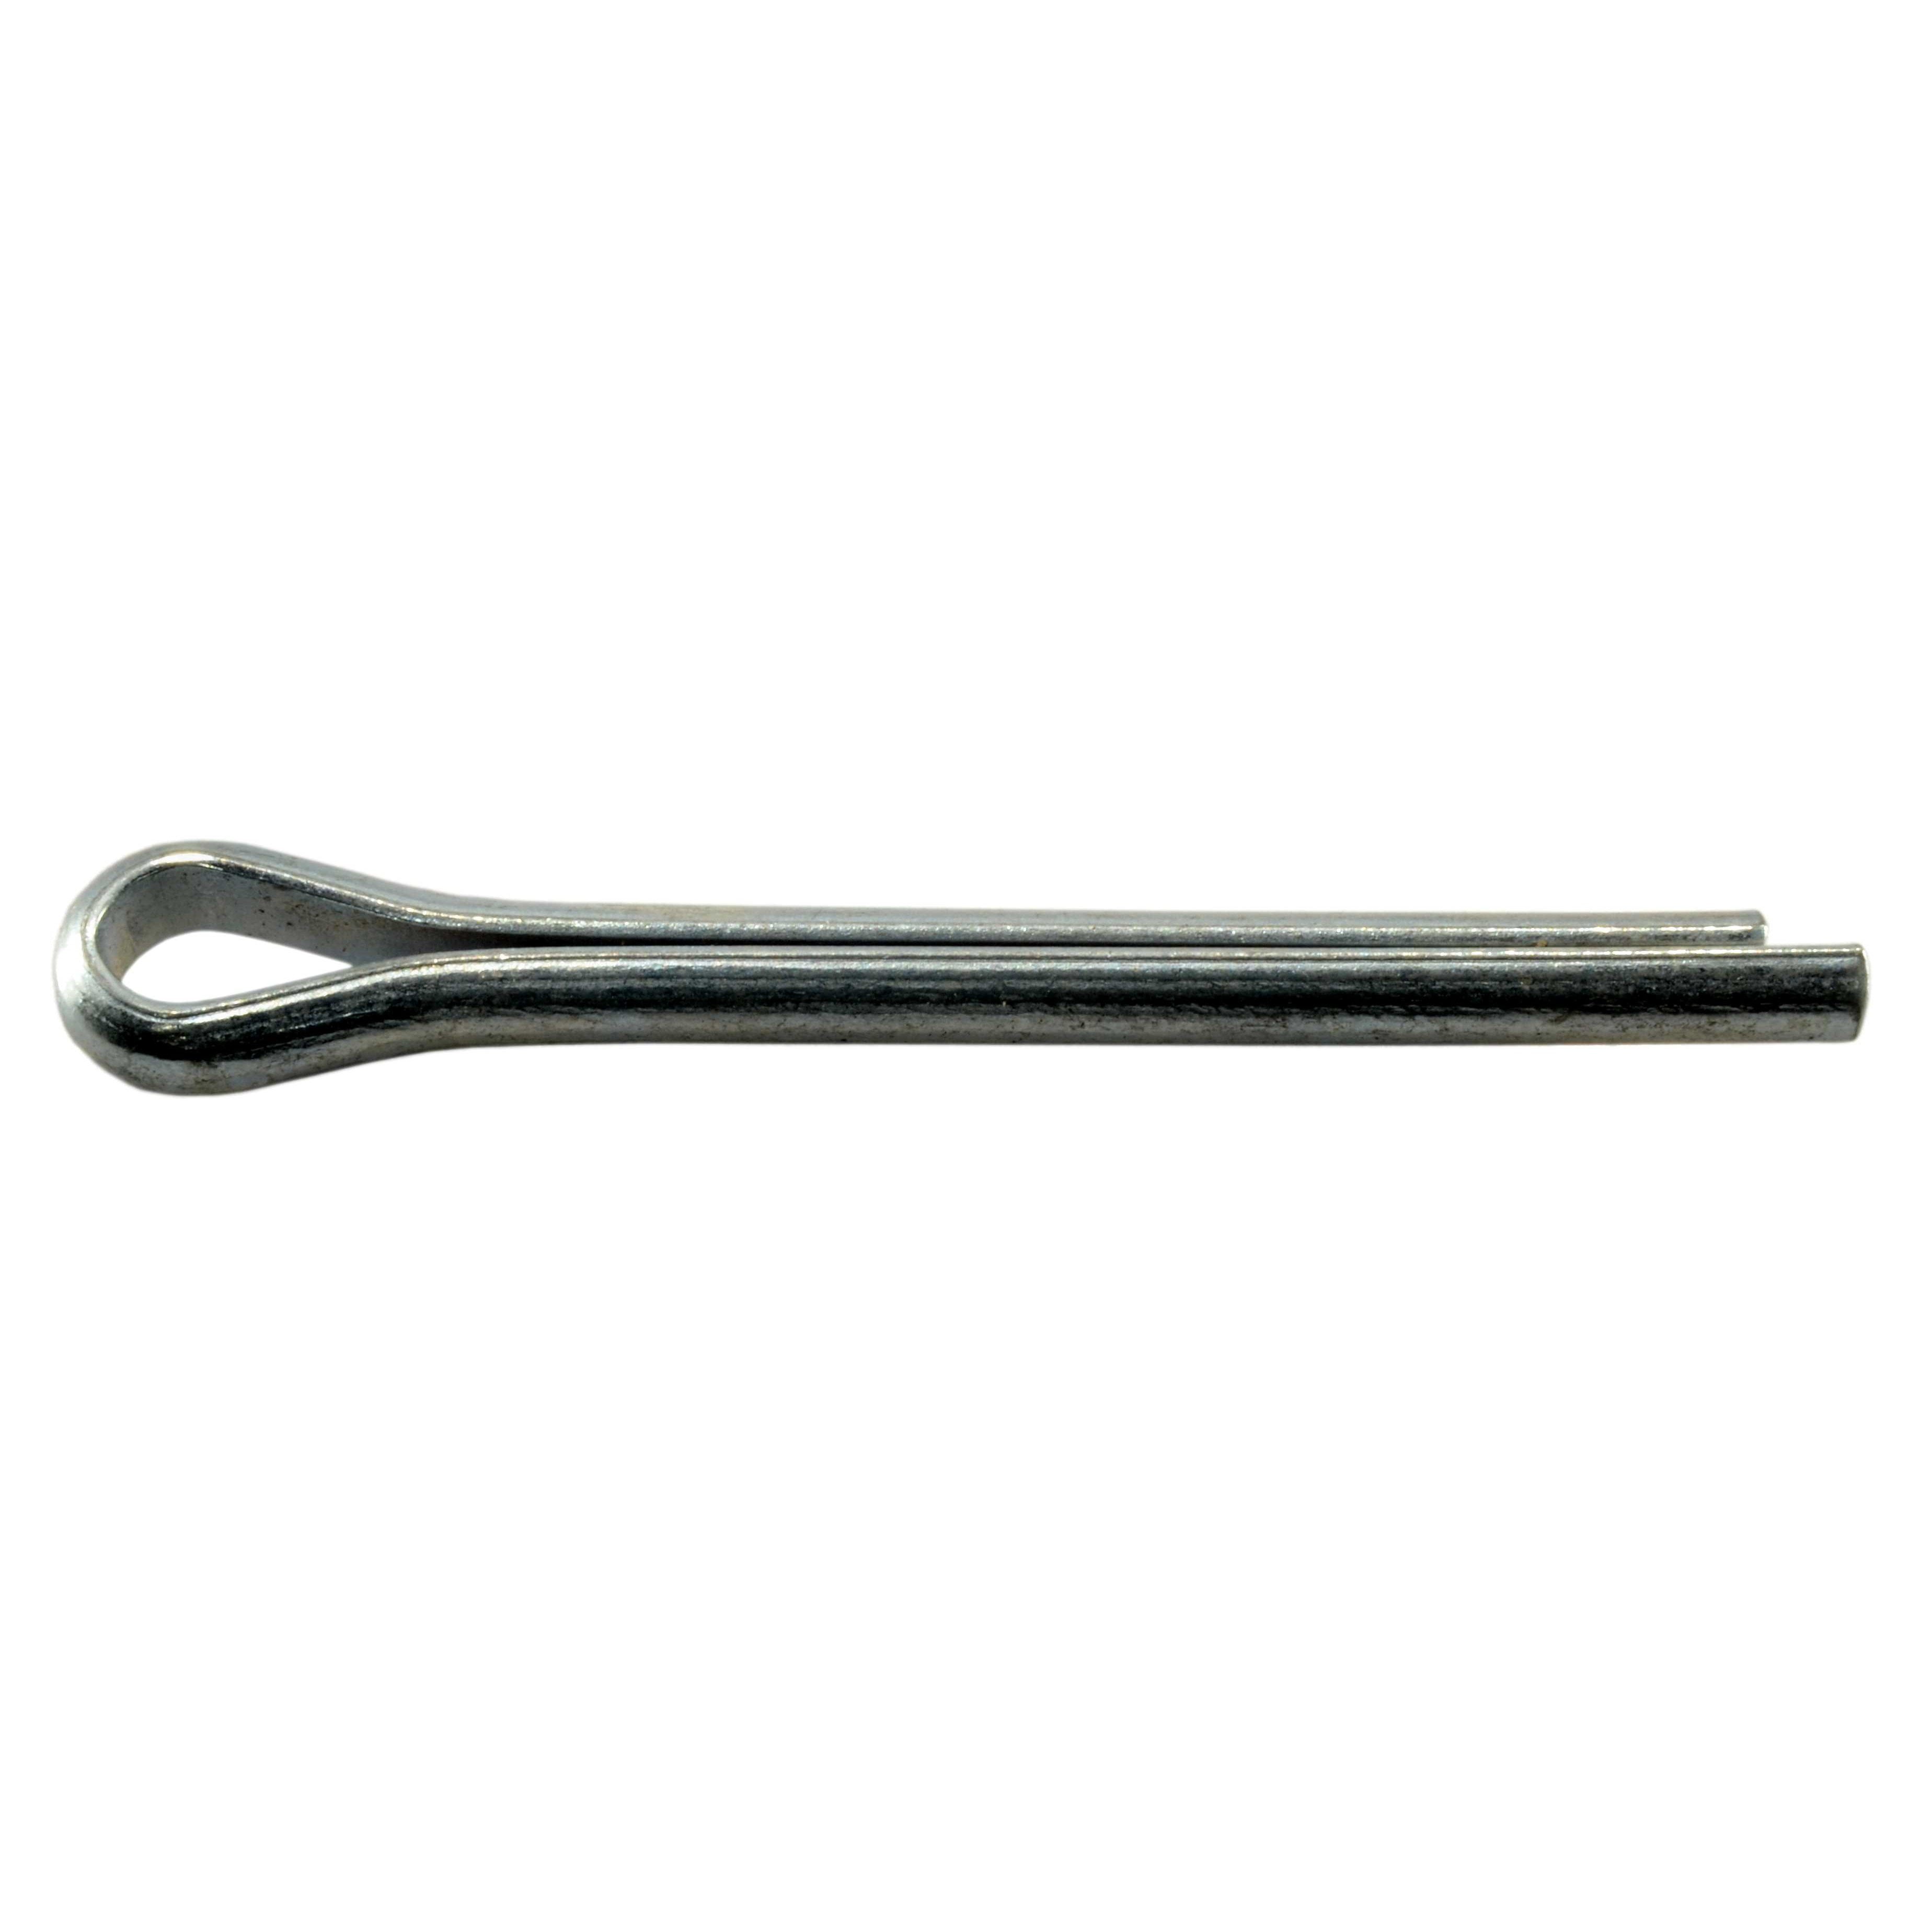 2.5 x 40mm Steel *Top Quality! Split cotter pins Pack of 12 